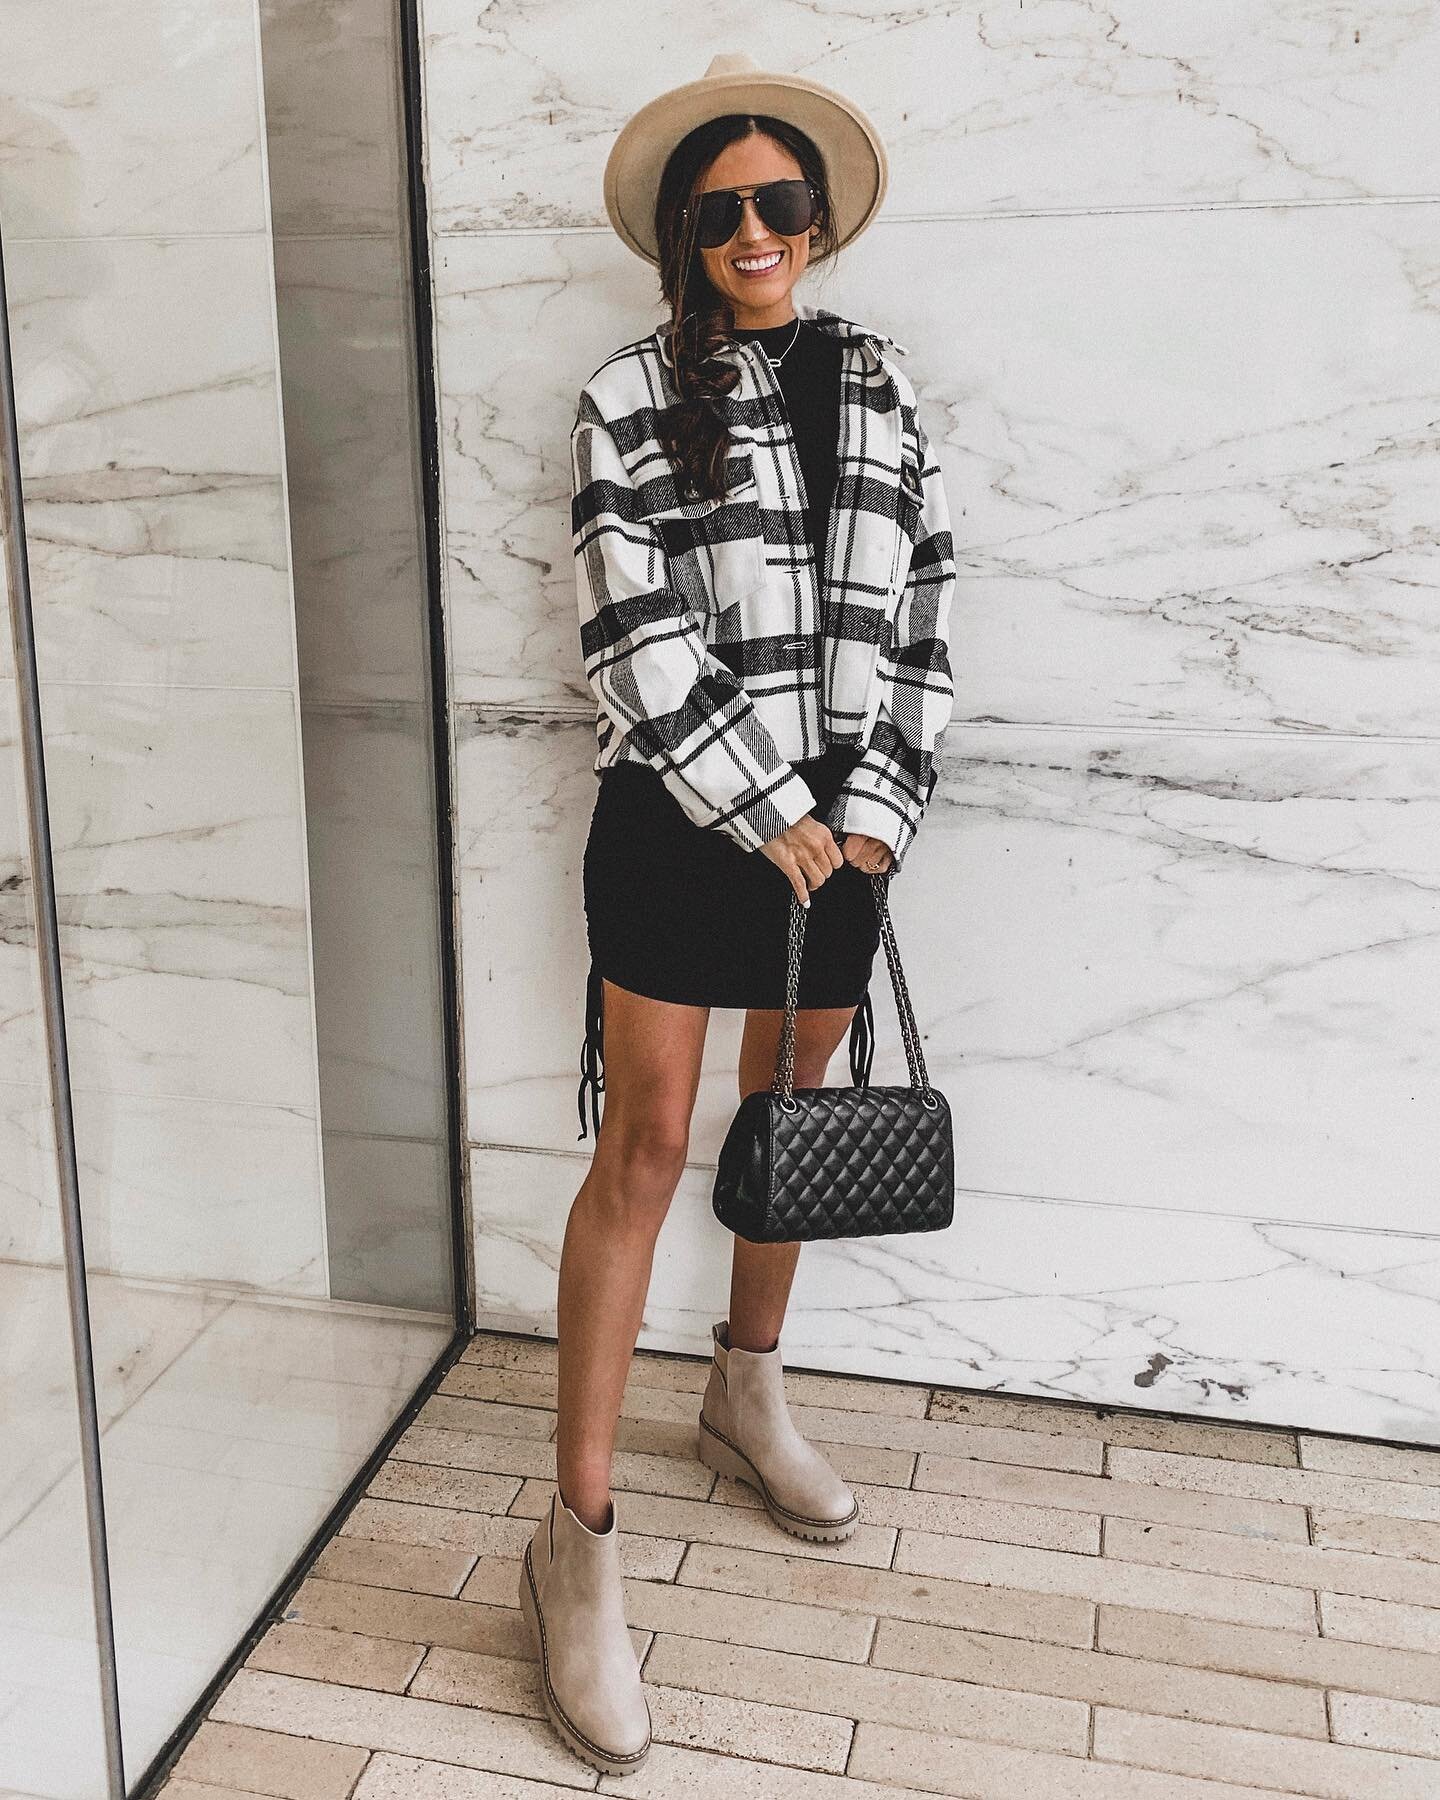 It&rsquo;s a plaid bit early to bust out a shacket in Houston but YOLO👊🏻 I&rsquo;m realizing my fall wardrobe consists almost entirely of neutrals and I&rsquo;m not mad about it. Anyone else?! http://liketk.it/3oJkh #falloutfit #fallstyle #houstont